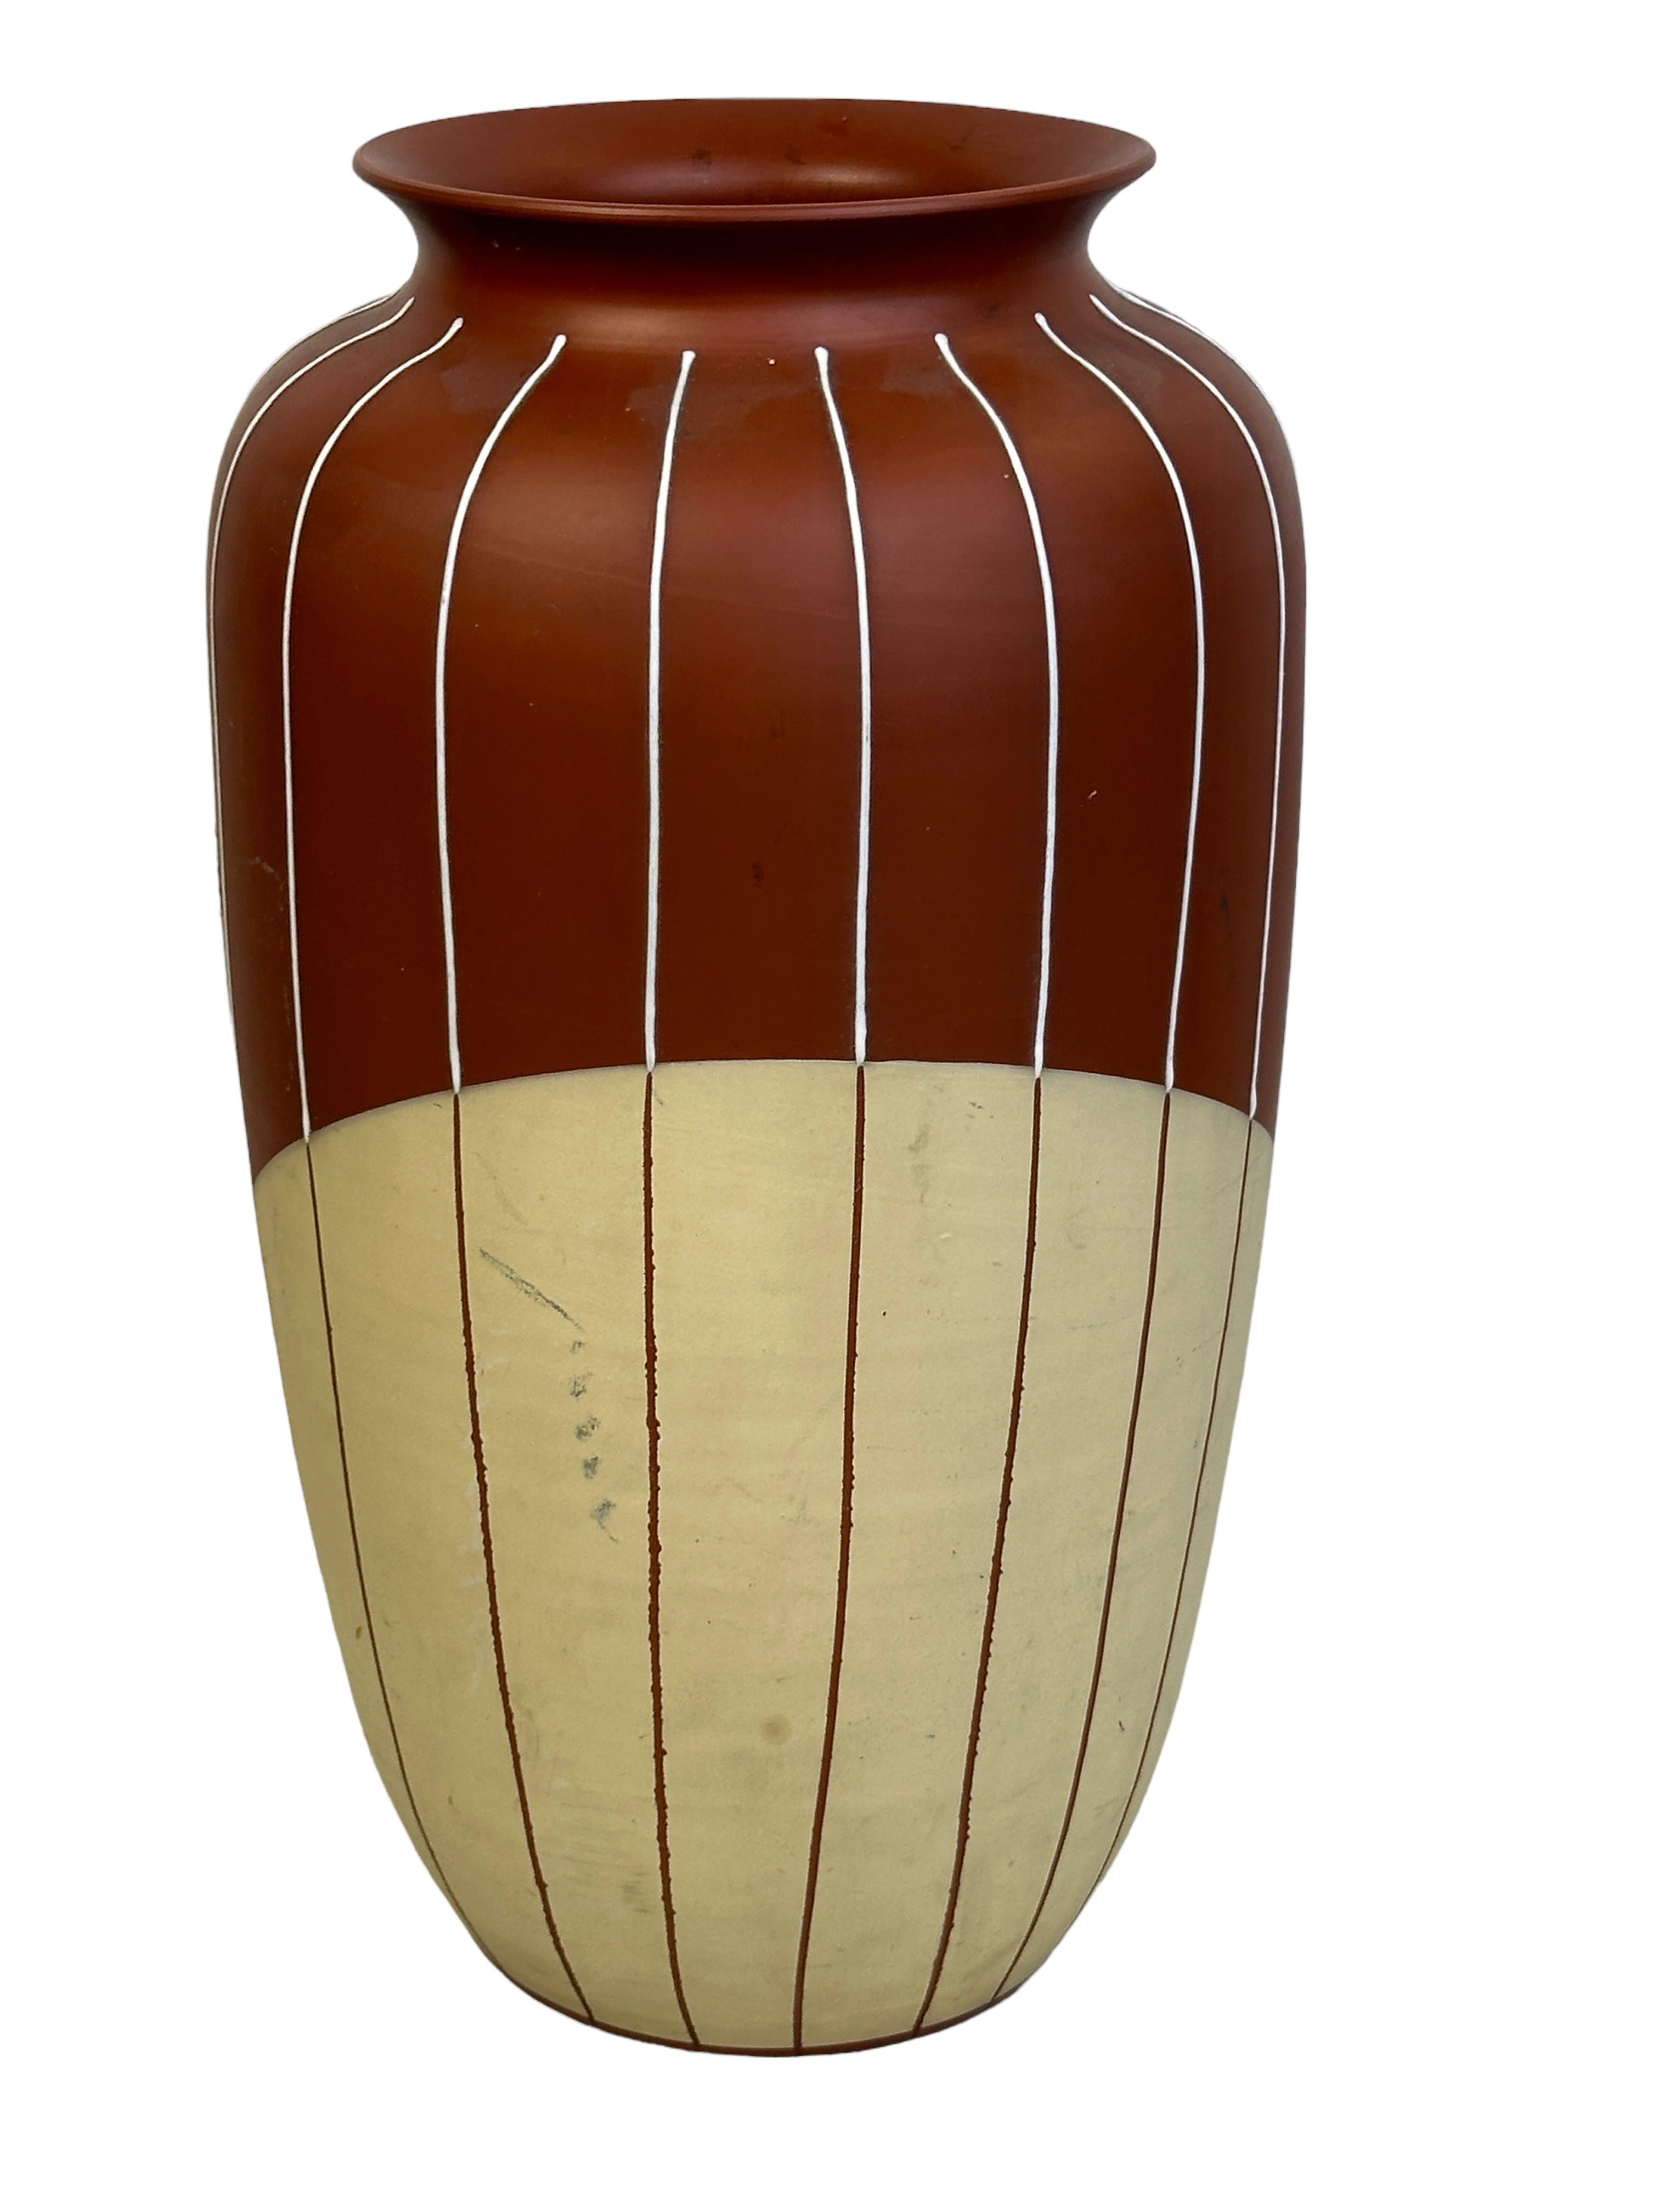 An amazing ceramic Mid-Century Modern floor vase made in Germany, circa 1950s. This is a heavy floor vase. Vase is in very good condition with no chips, cracks, or flea bites. Nice color and sure a nice addition to any room. Marked with a label and